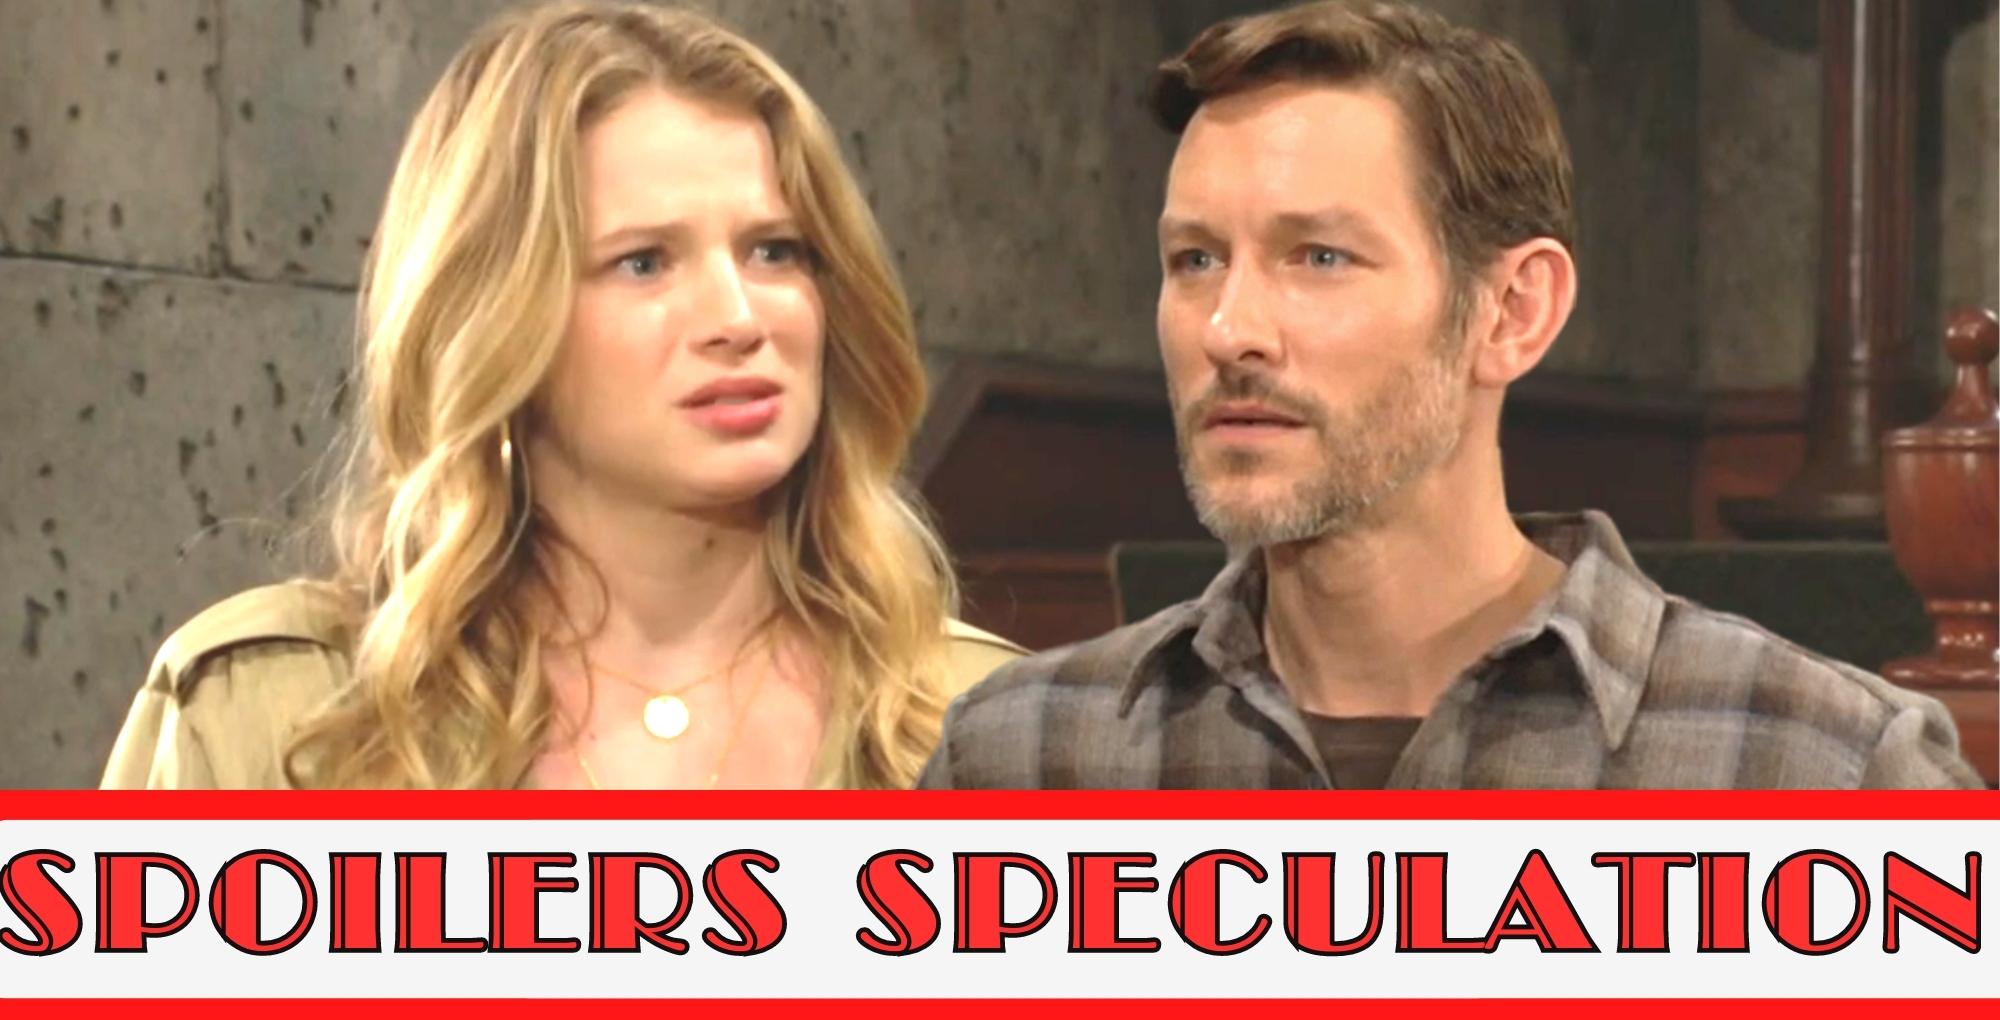 y&r spoilers speculation about summer and daniel regretting their decision.